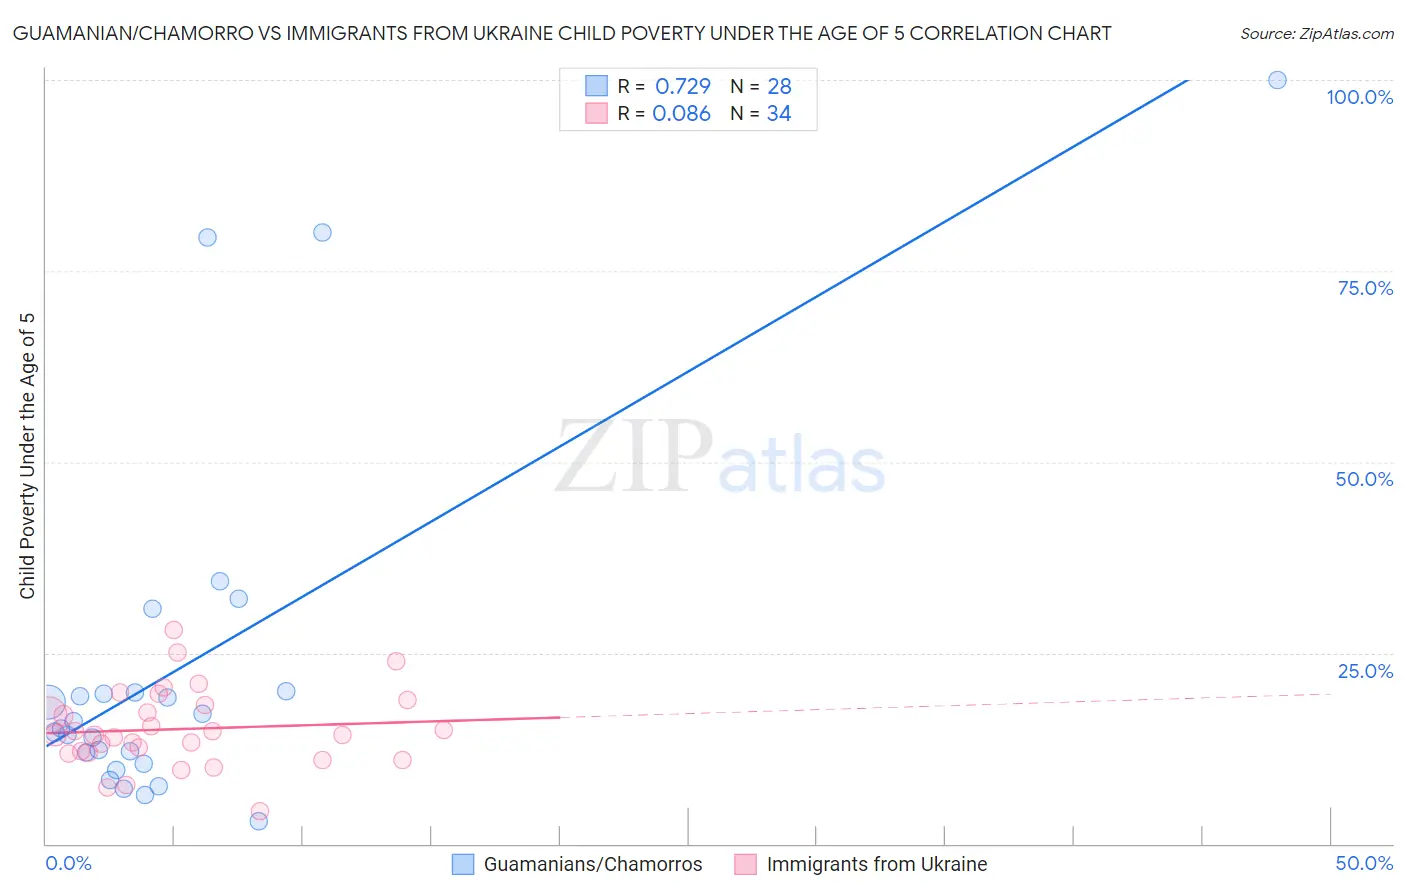 Guamanian/Chamorro vs Immigrants from Ukraine Child Poverty Under the Age of 5